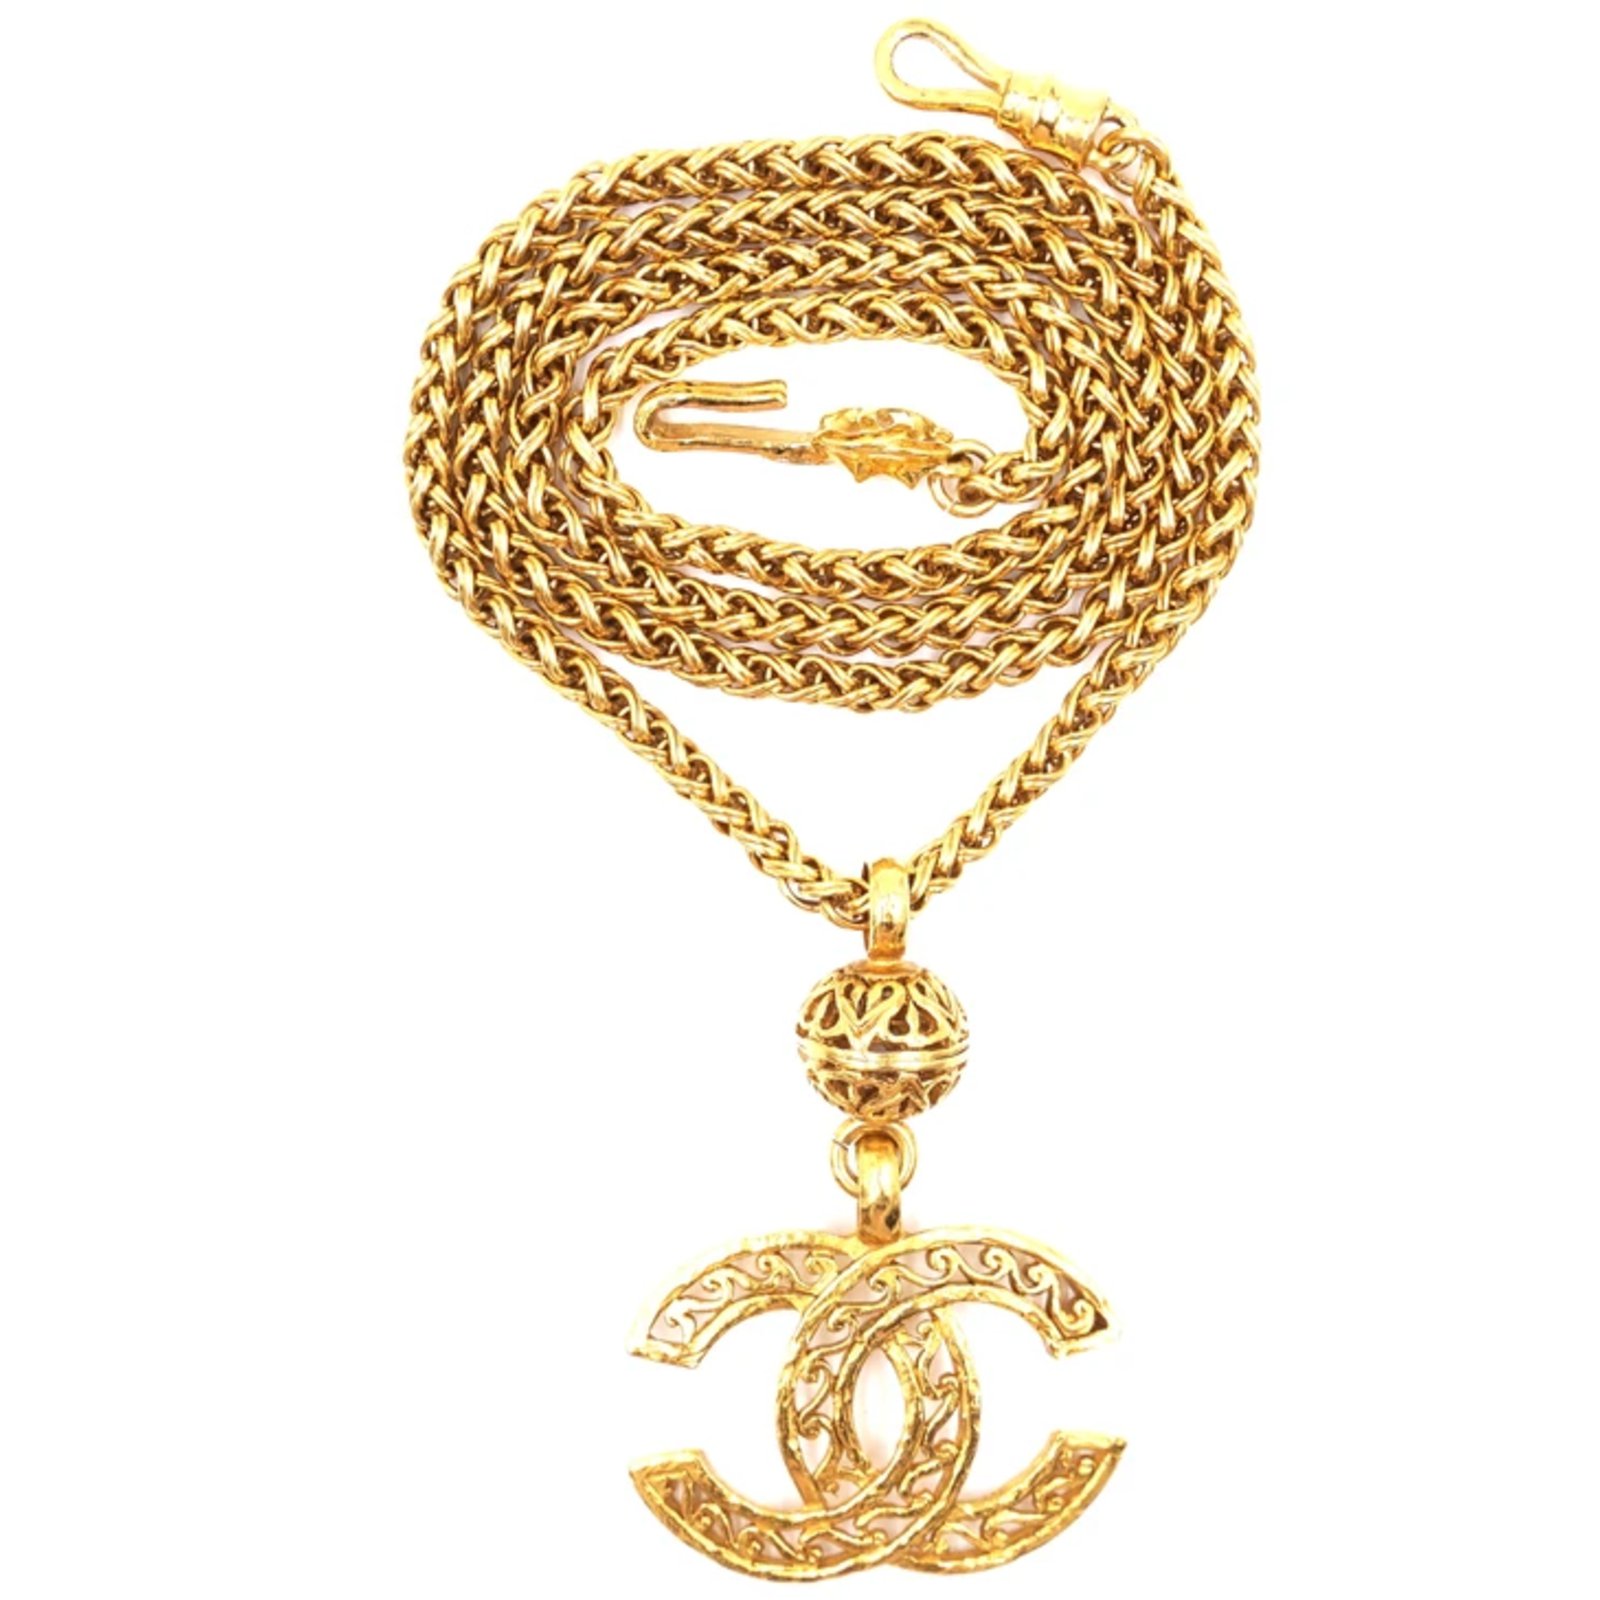 Chanel gold chain